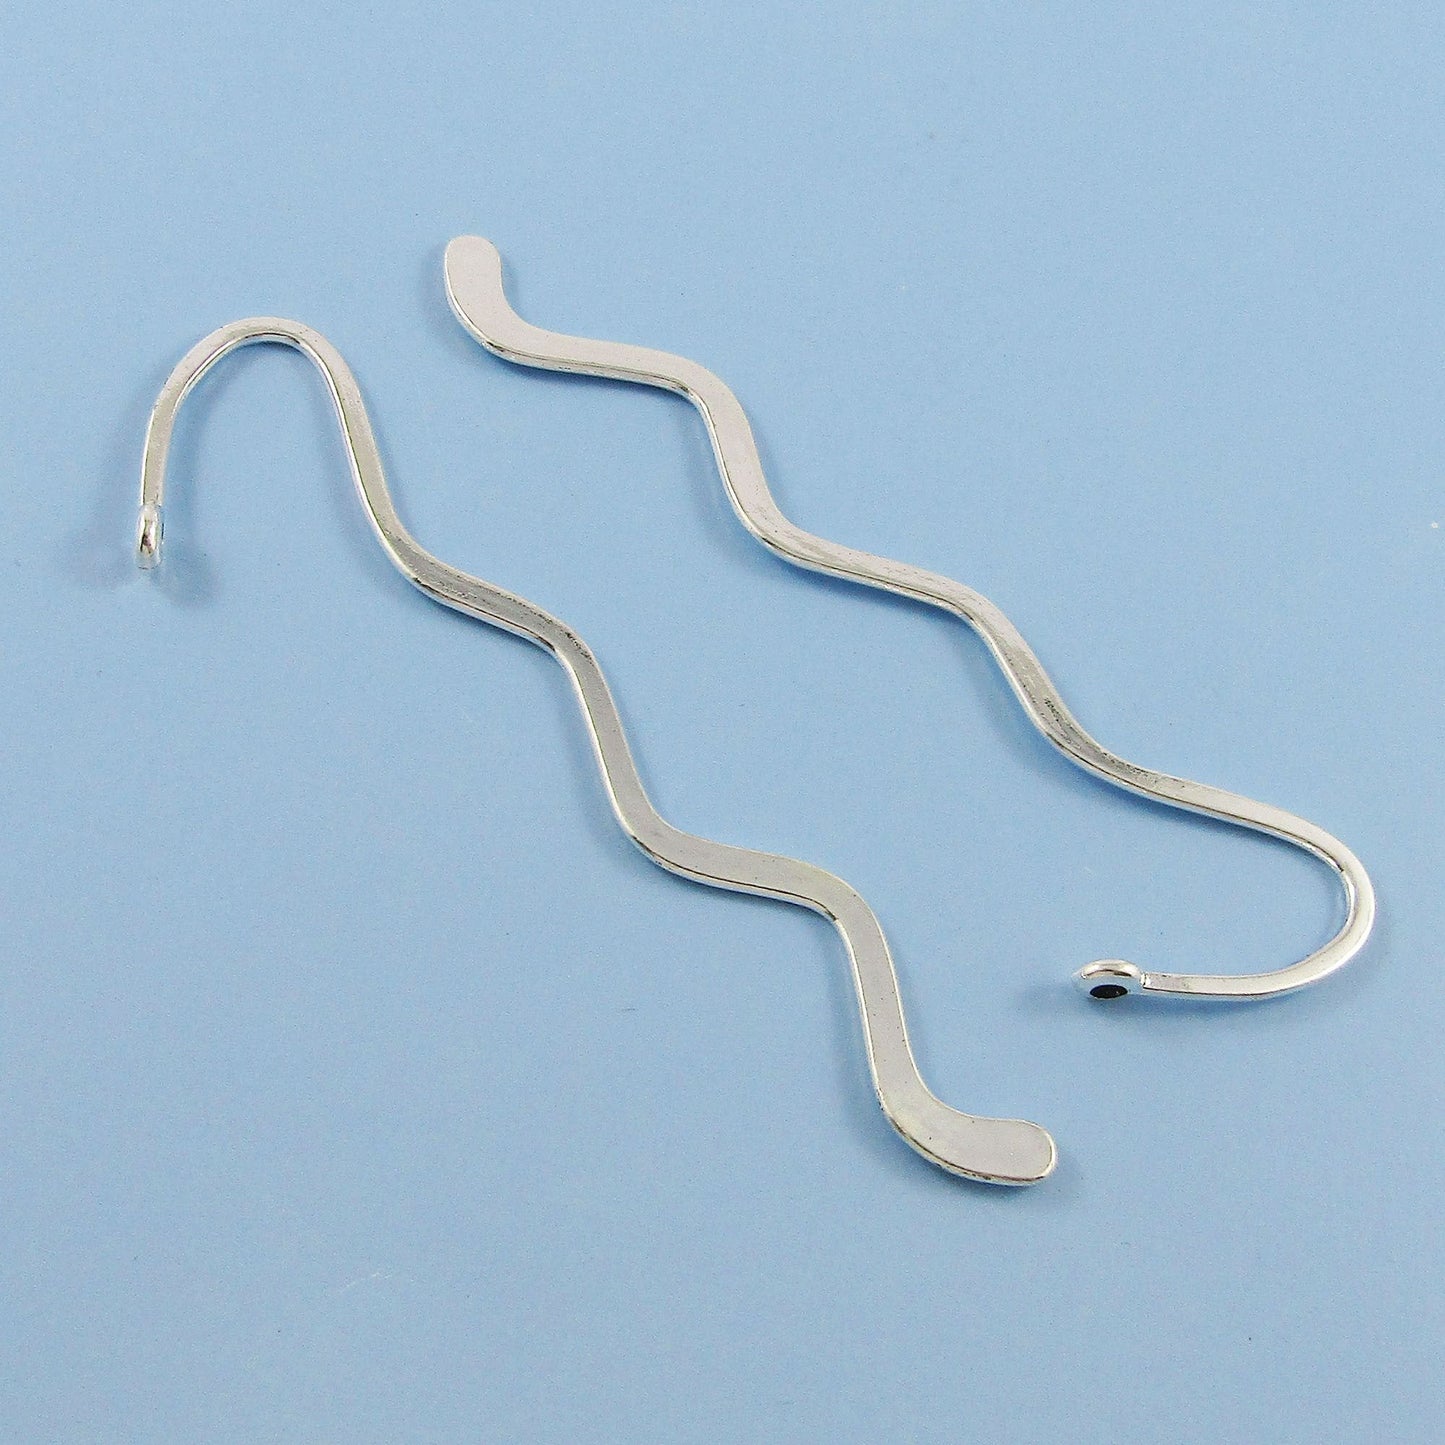 Bulk Squiggly Bookmark 86mm Silver Tone Finish Suit Beading Select Qty 1/5/10